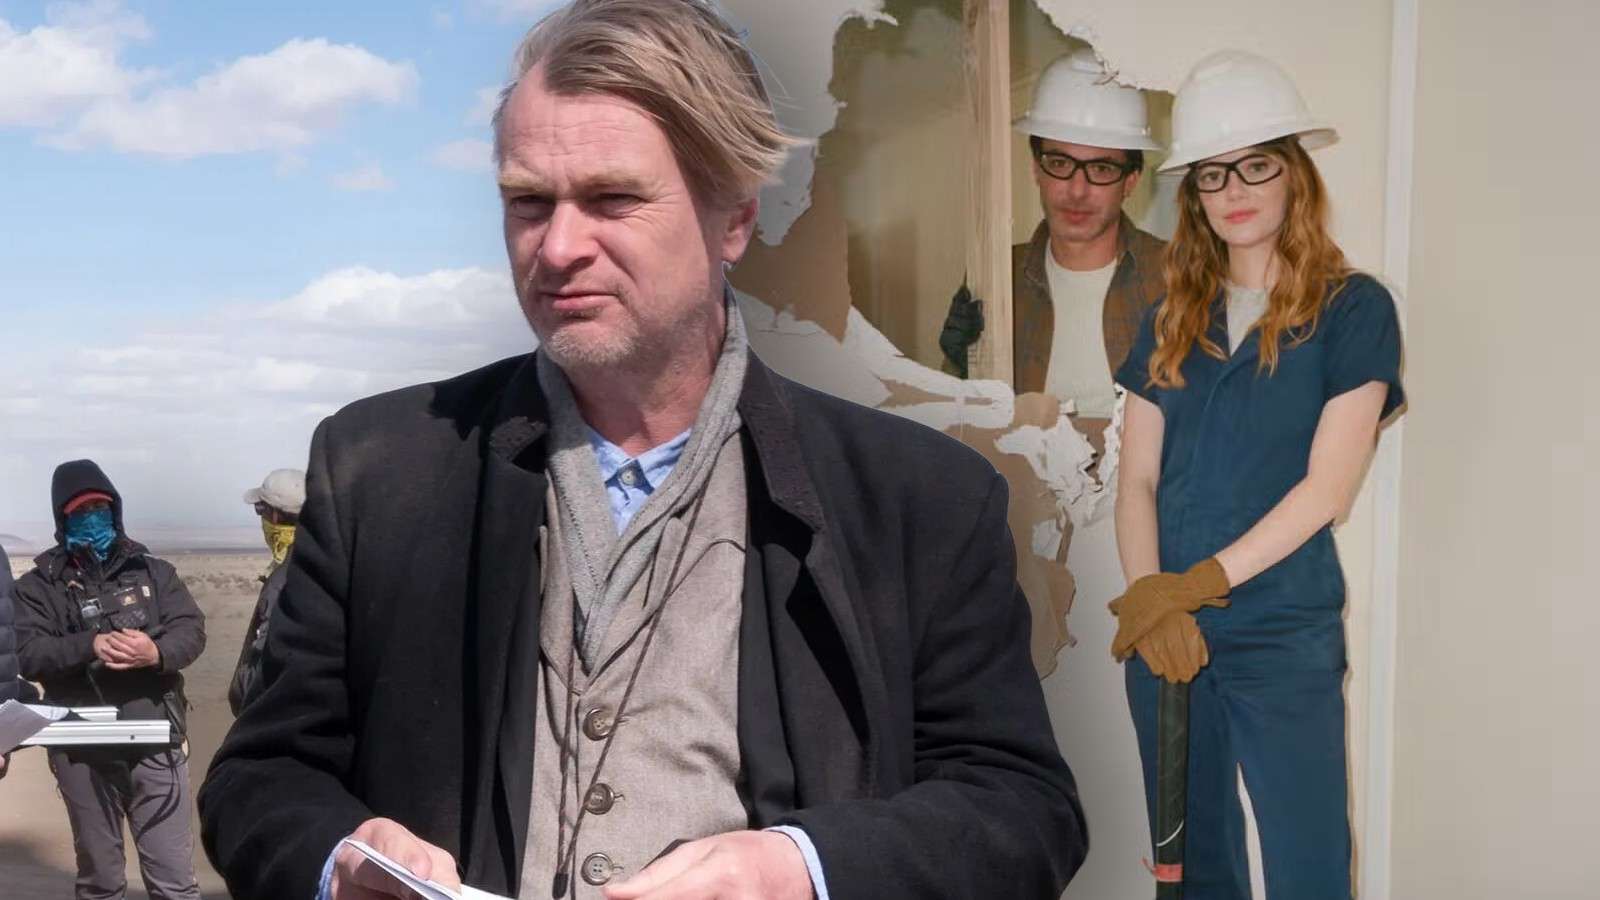 Christopher Nolan on the set of Oppenheimer and Emma Stone and Nathan Fielder in The Curse